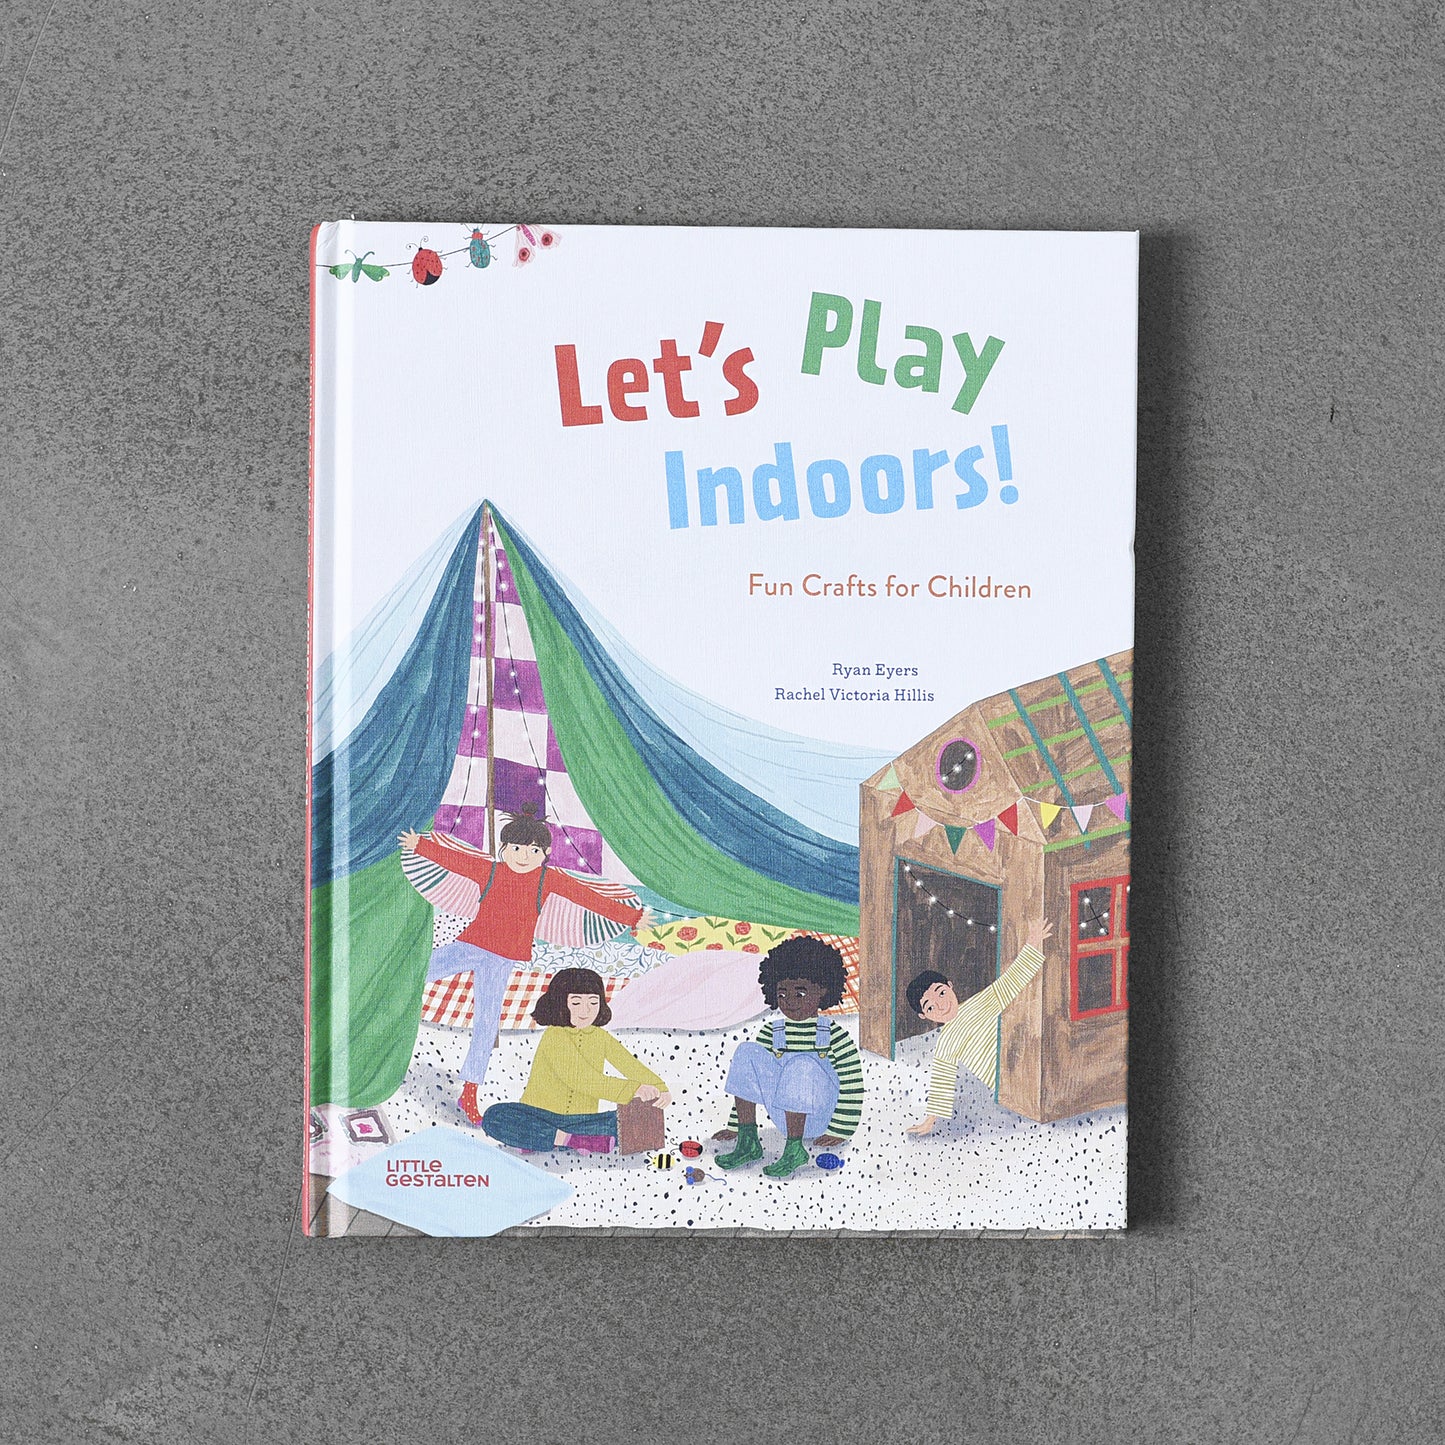 Let’s Play Indoors!